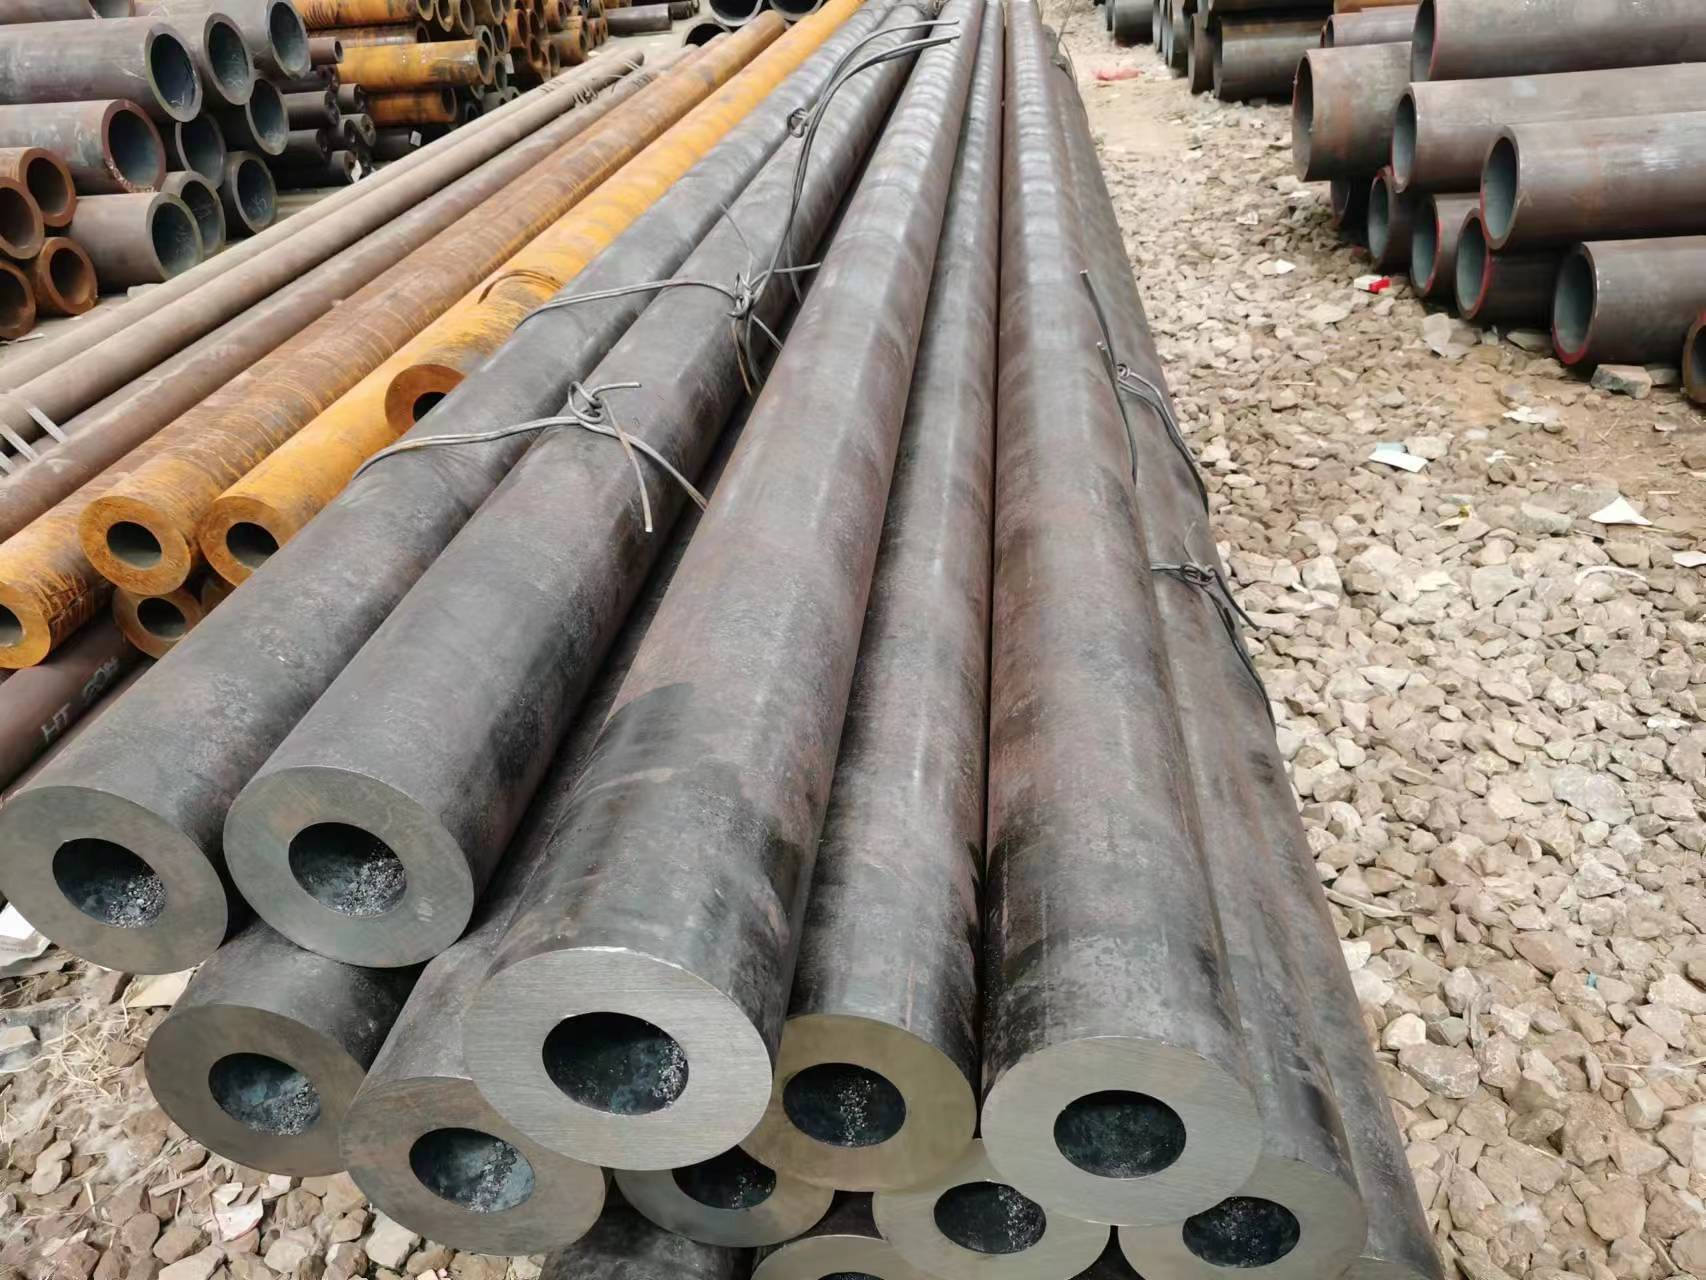 What are the uses of seamless steel pipe according to different classifications?